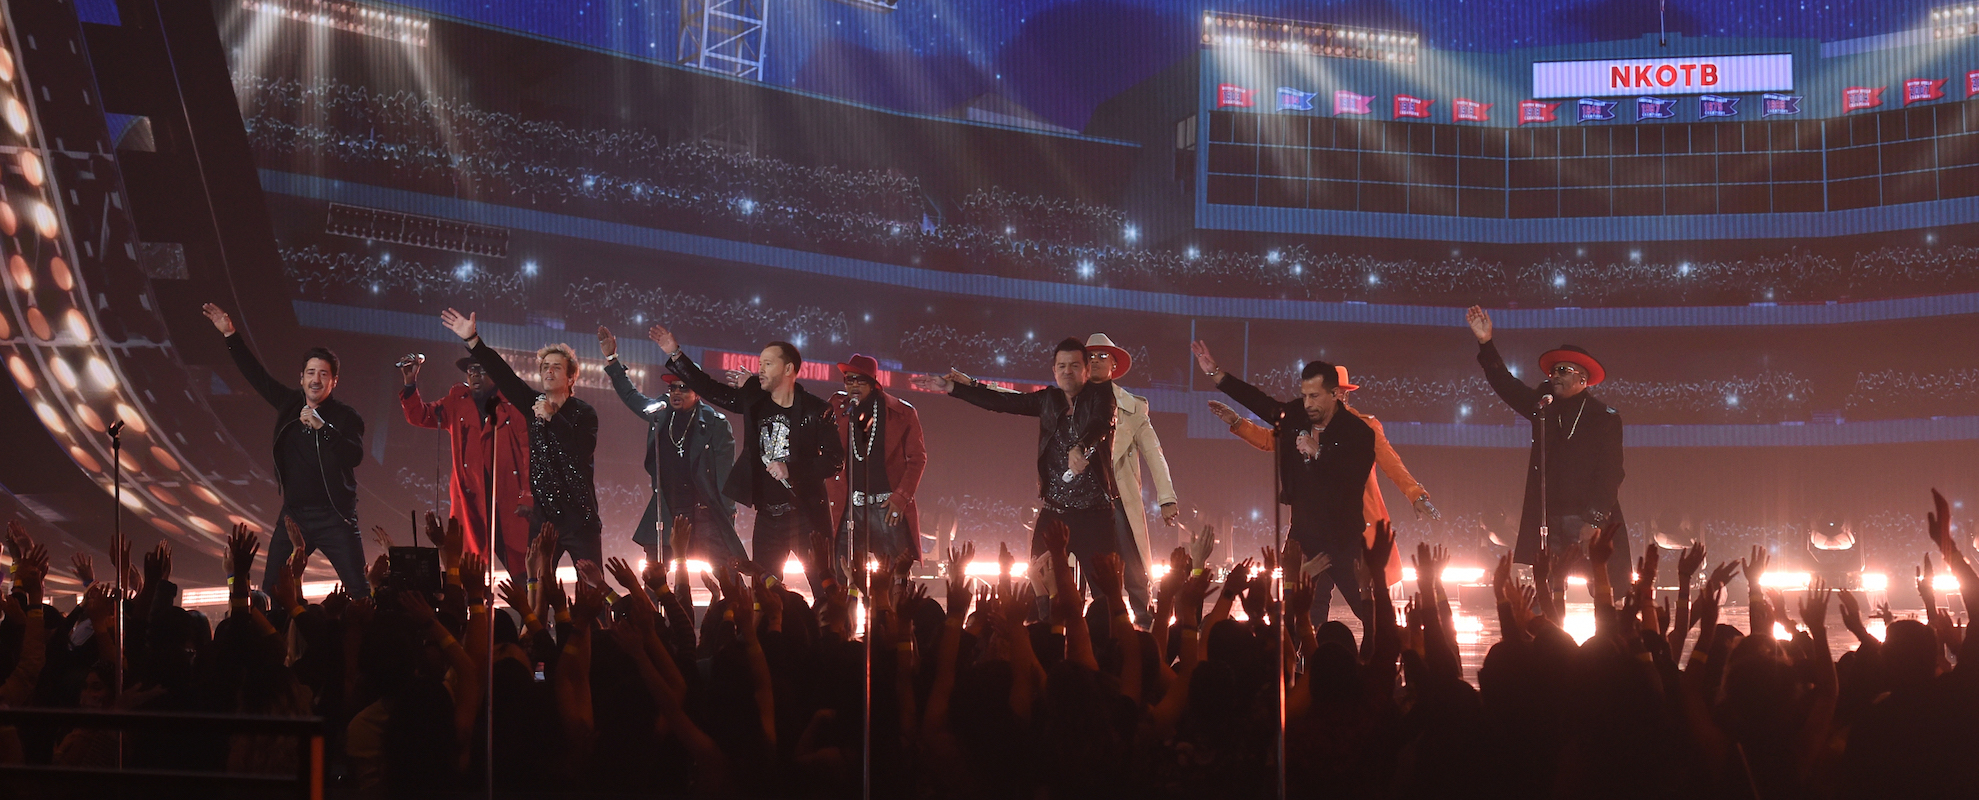 New Edition and New Kids on the Block Perform Together for First Time on 2021 American Music Awards